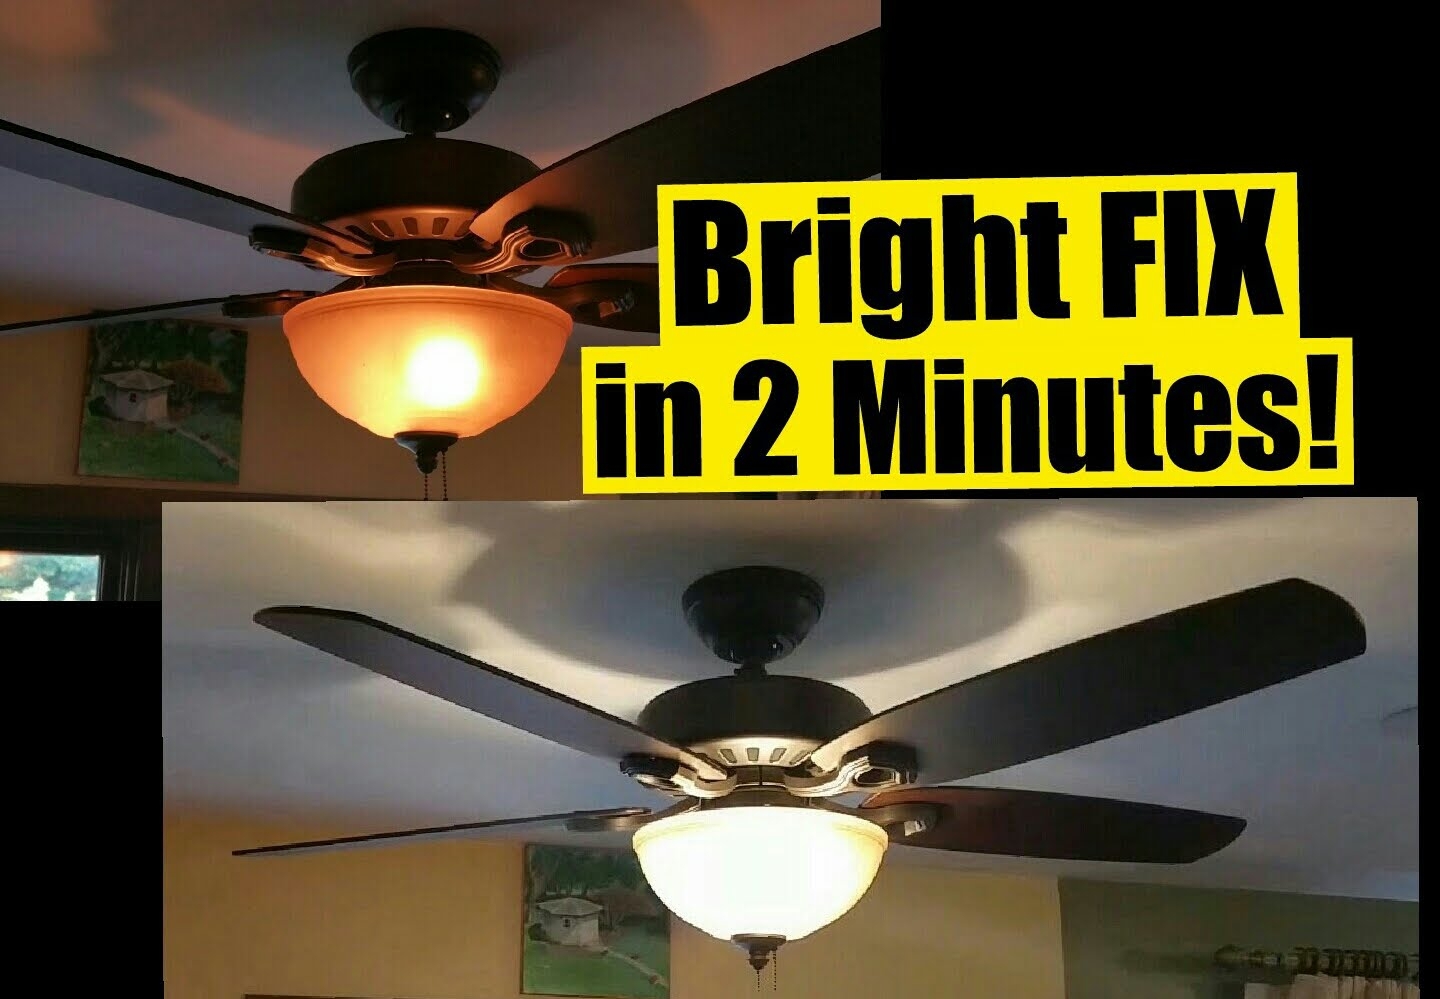 Permalink to Ceiling Fan With Bright Led Light